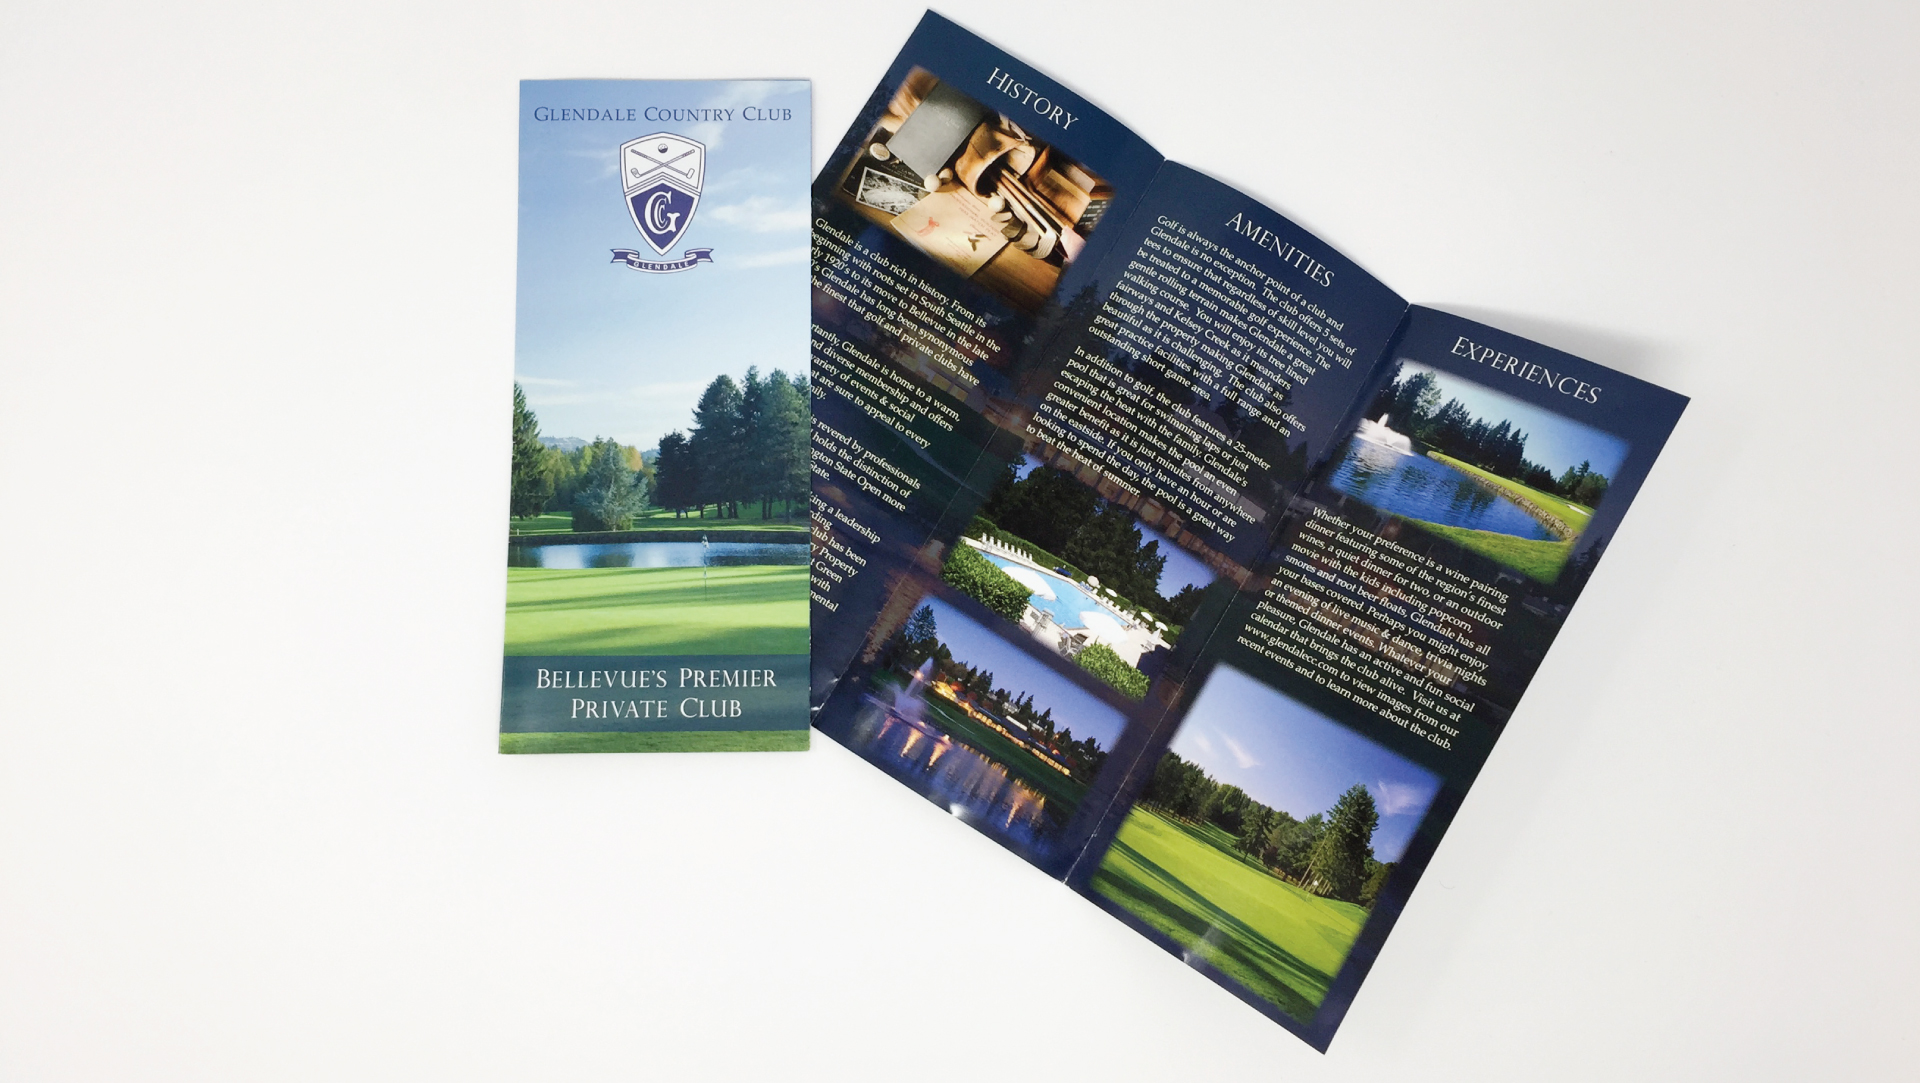 Glendale Country Club Brochure Printed and Designed by OMG